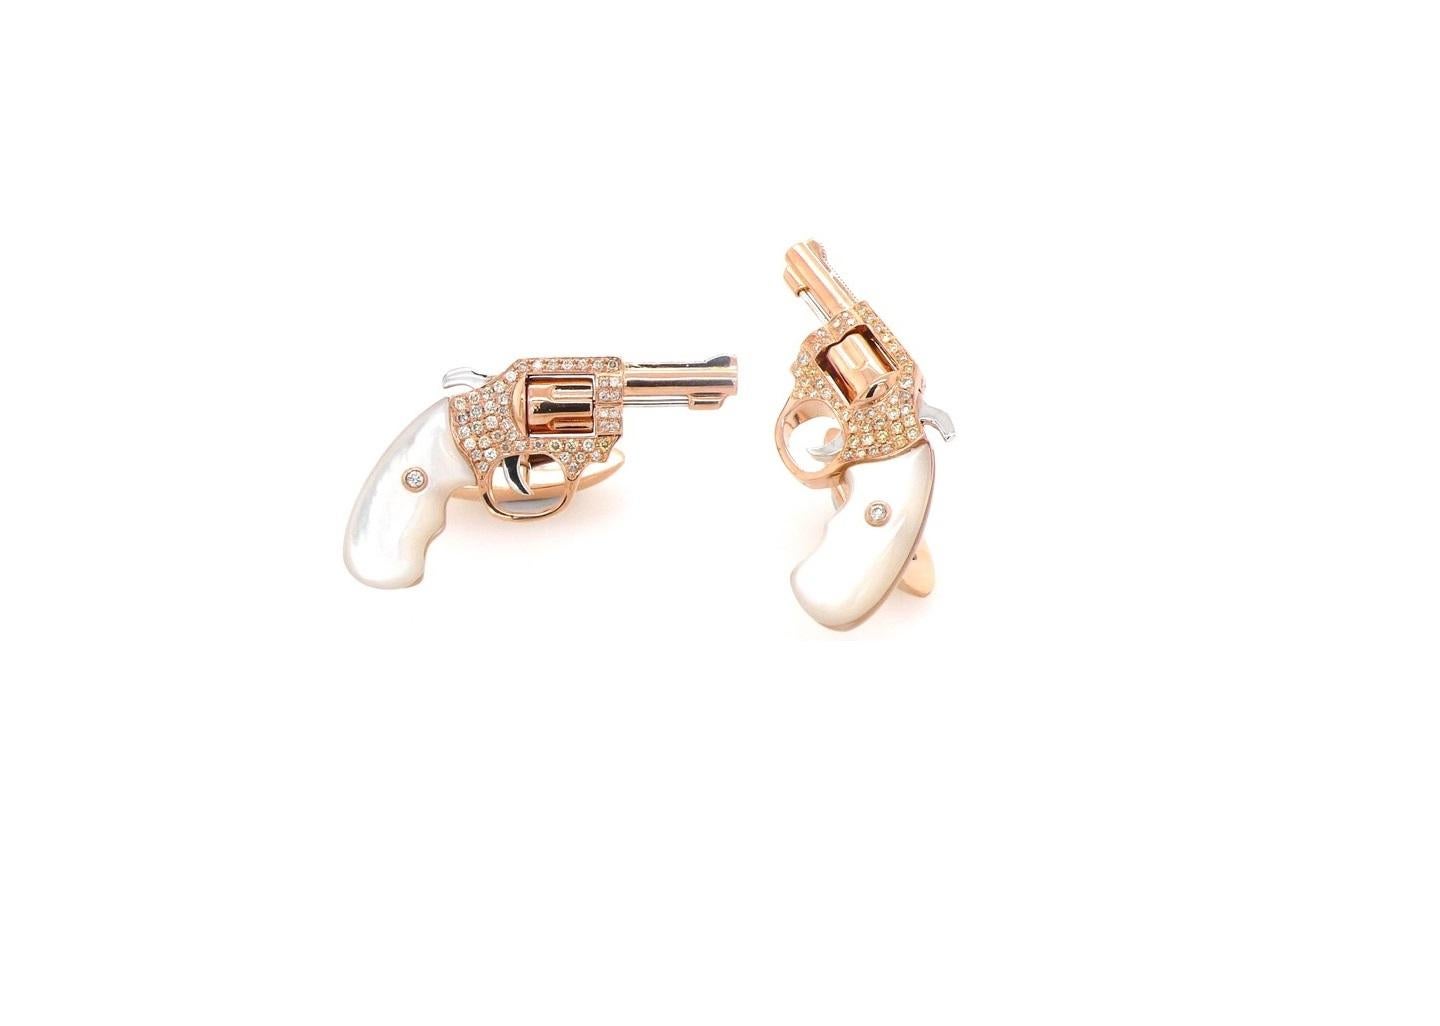 Diamond Pave White Pearl Luxury Gun Revolver 18 Karat Gold Unique Men Cufflinks

Natural Gemstone & Diamonds 1.20 CTW. Available in 18 karat yellow, rose and white gold alloys. 
Made to Order Luxury Cufflinks - Customizable
This is a combination of